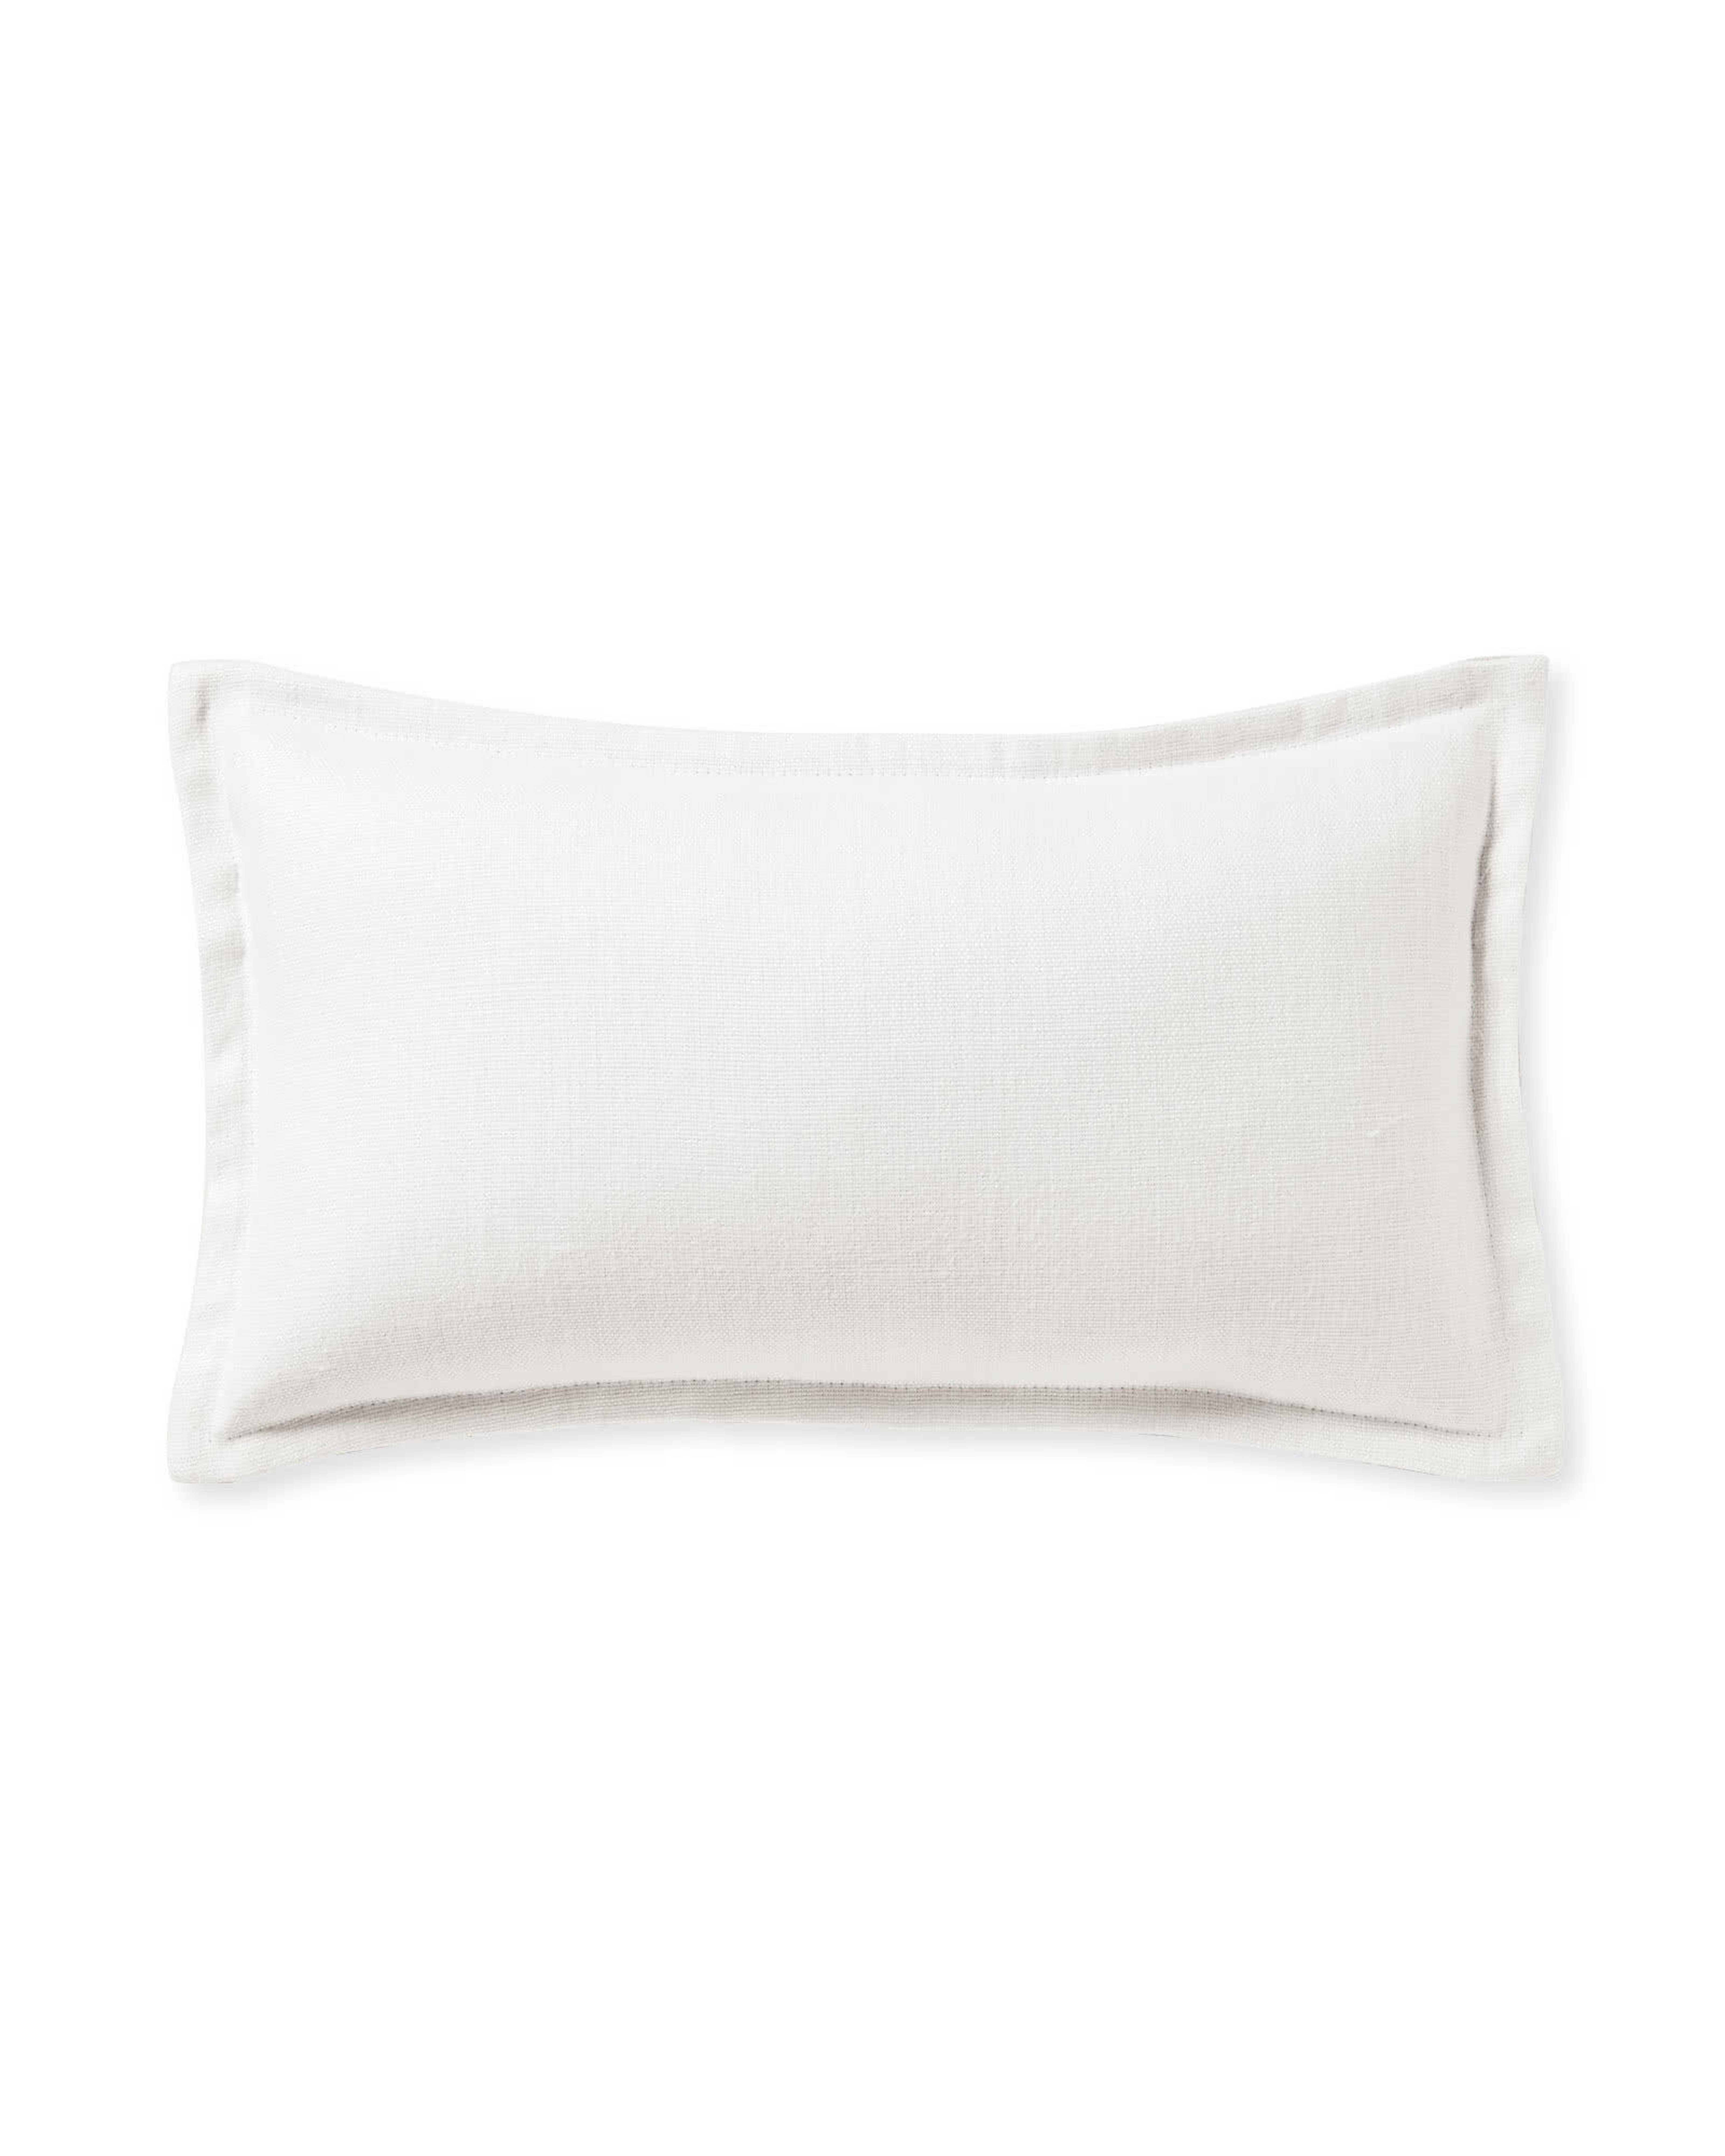 Two Tone Zip Pillow Cover - Serena and Lily